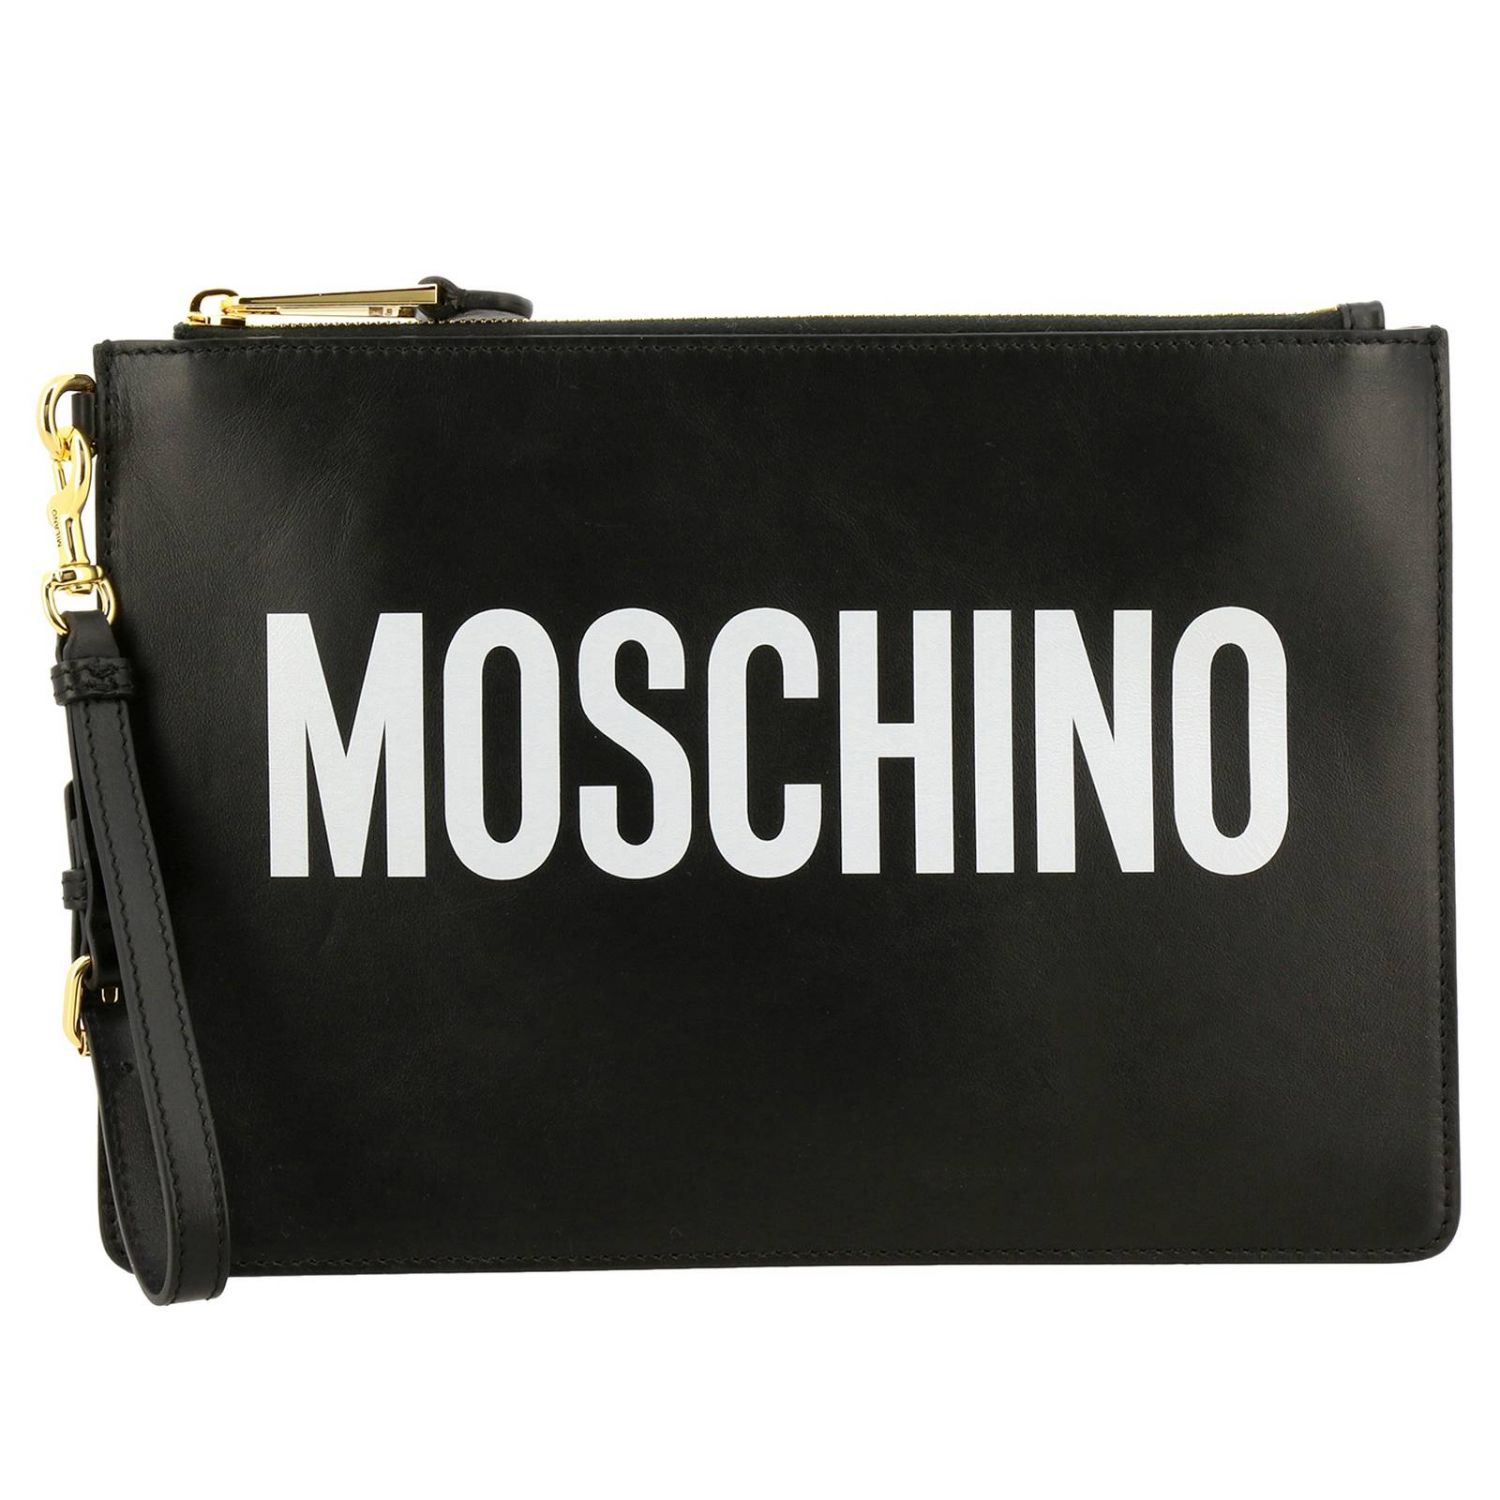 Boutique Moschino Outlet: Clutch women | Clutch Boutique Moschino Women ...